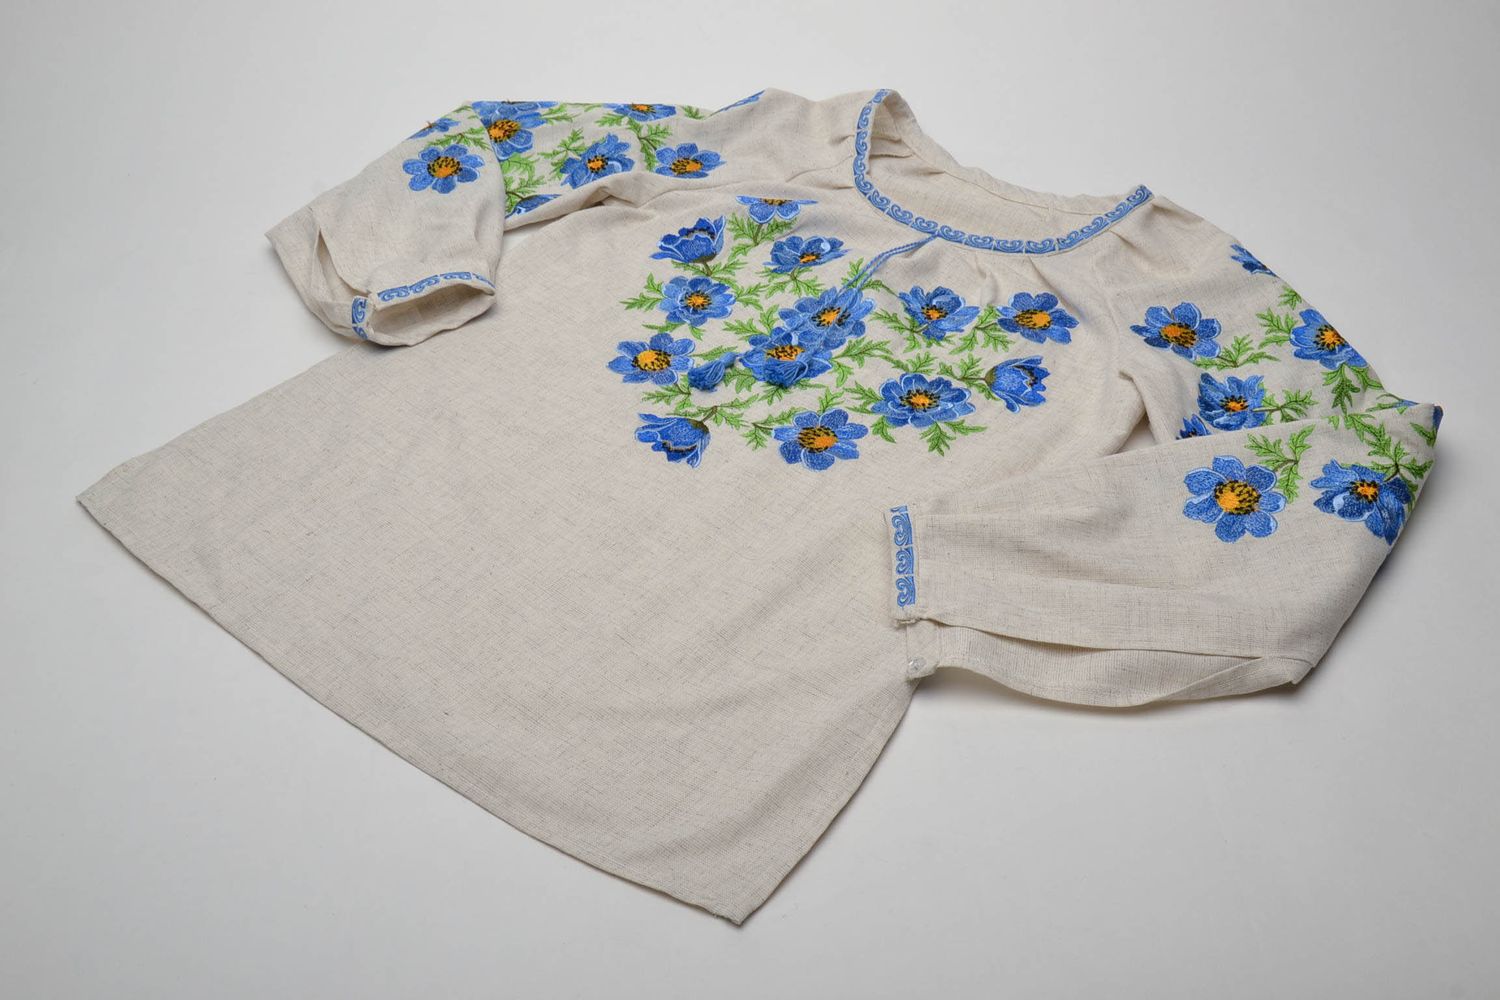 Women's embroidered blouse photo 5